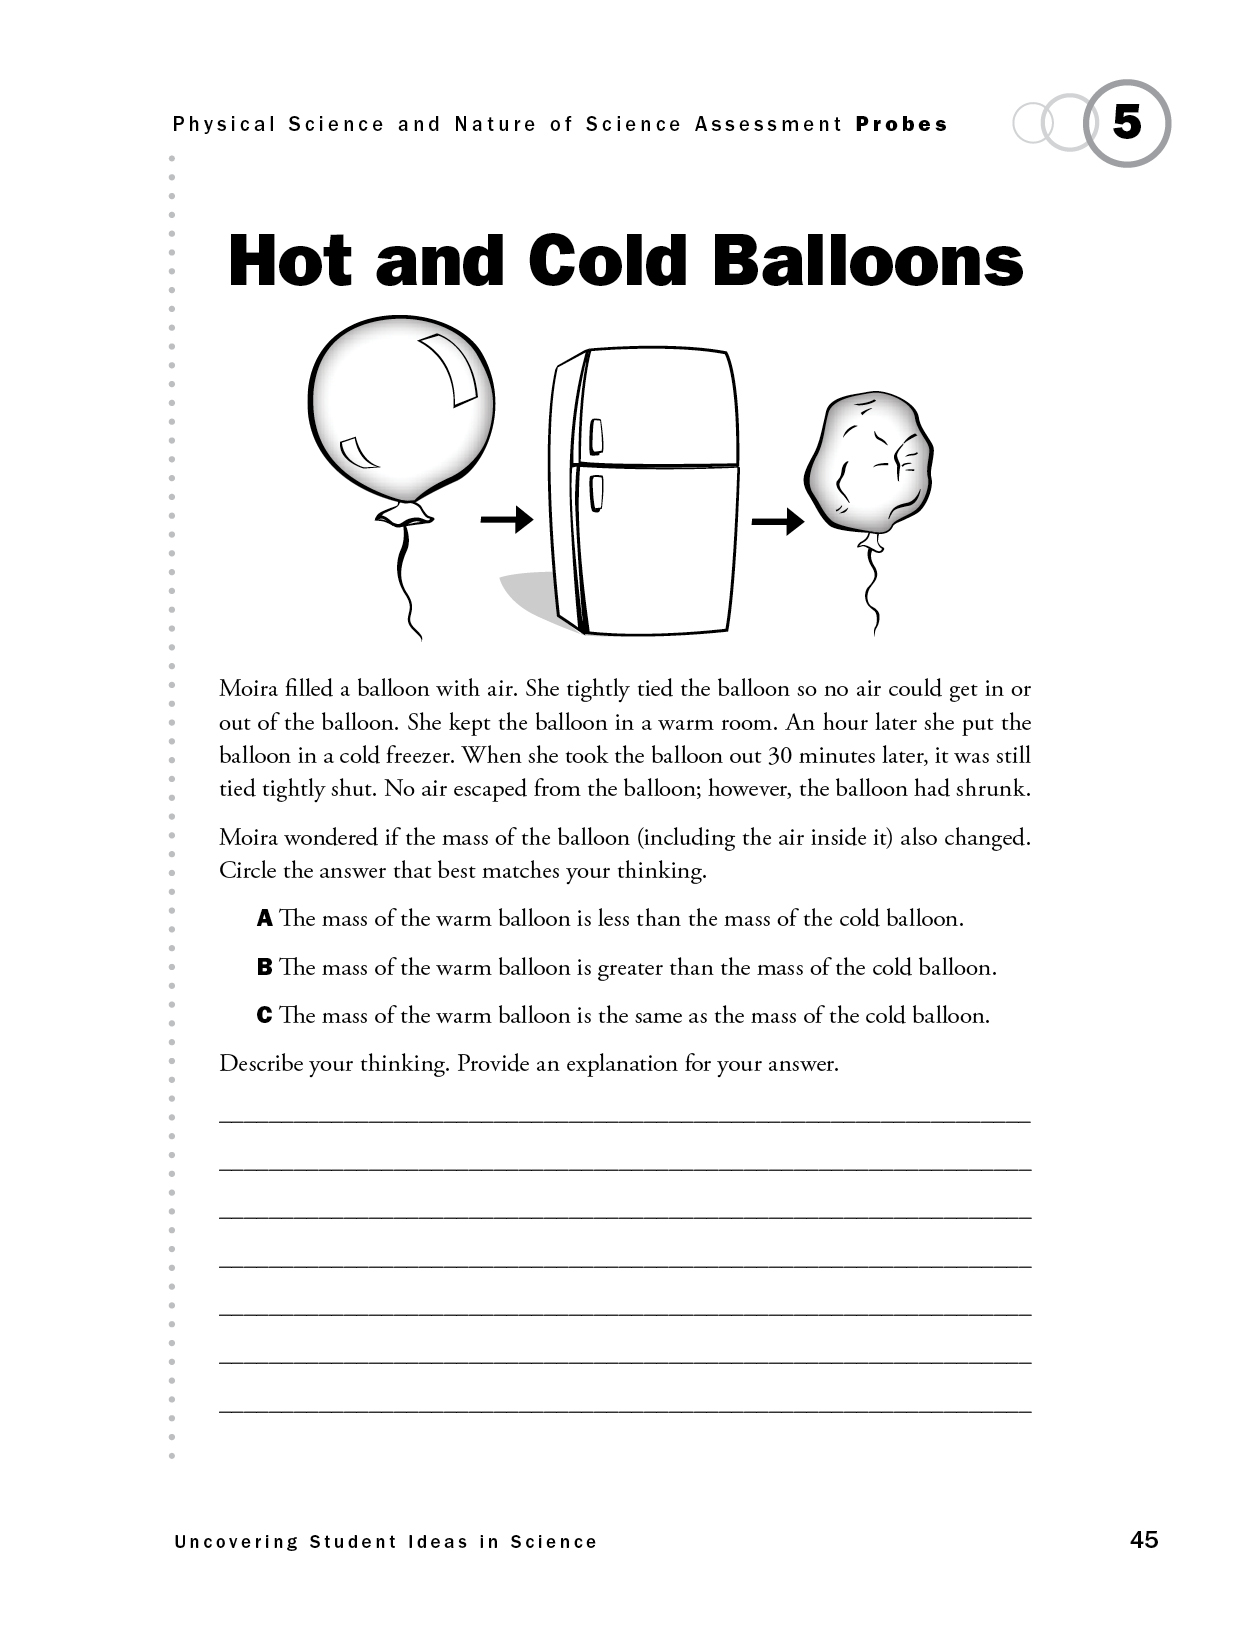 Hot and Cold Balloons